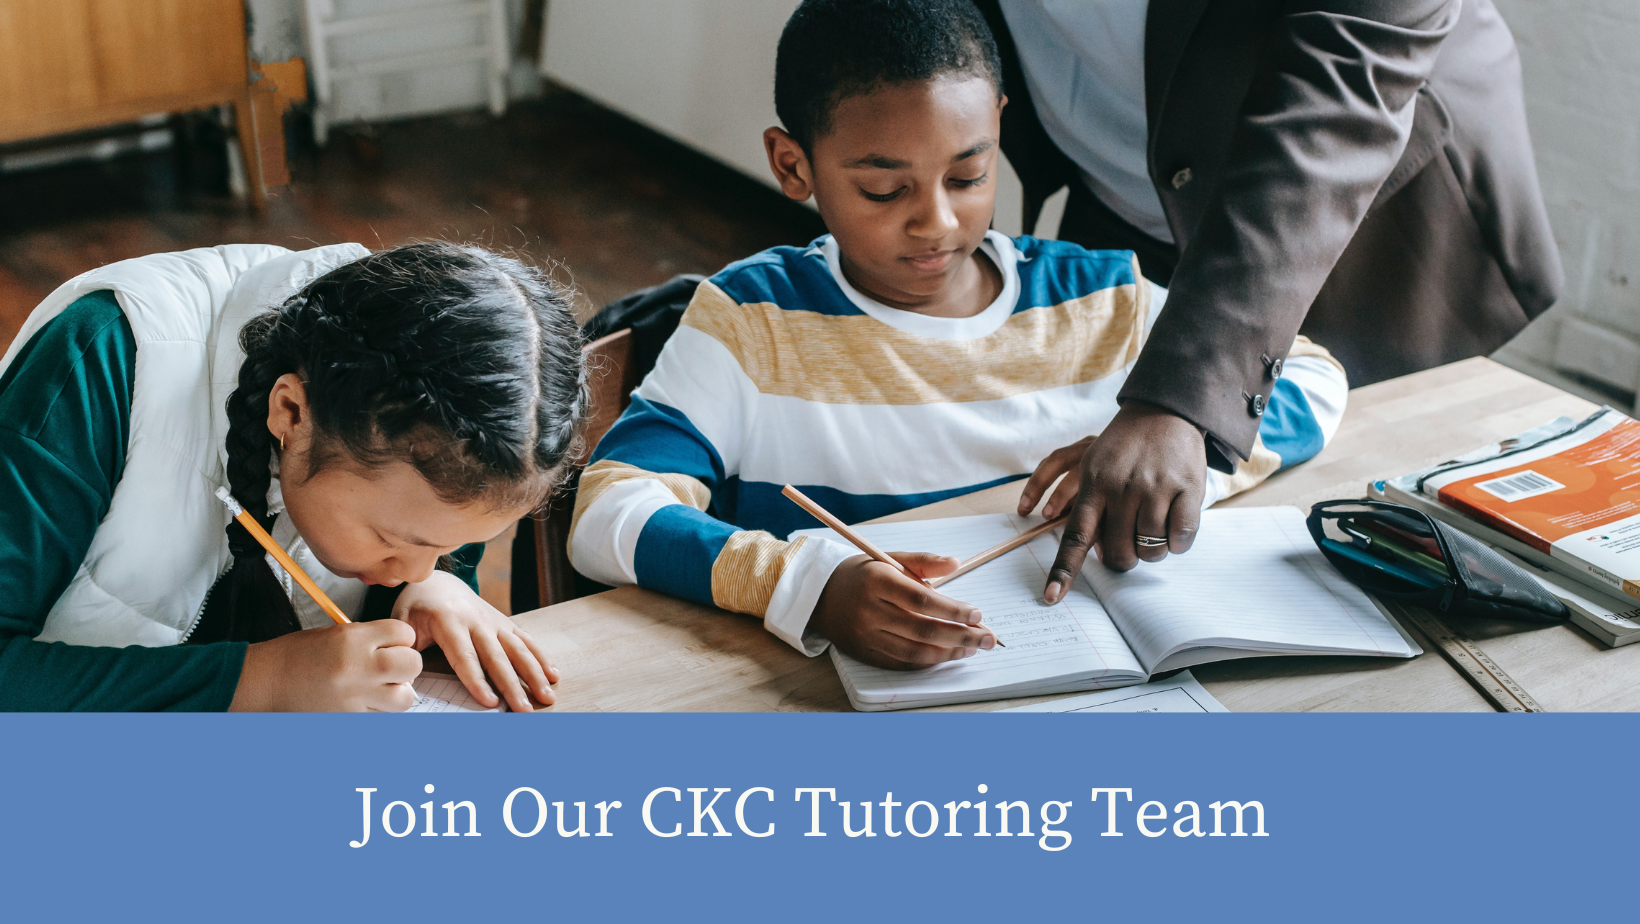 You can join our CKC Tutoring team and help underserved children thrive!